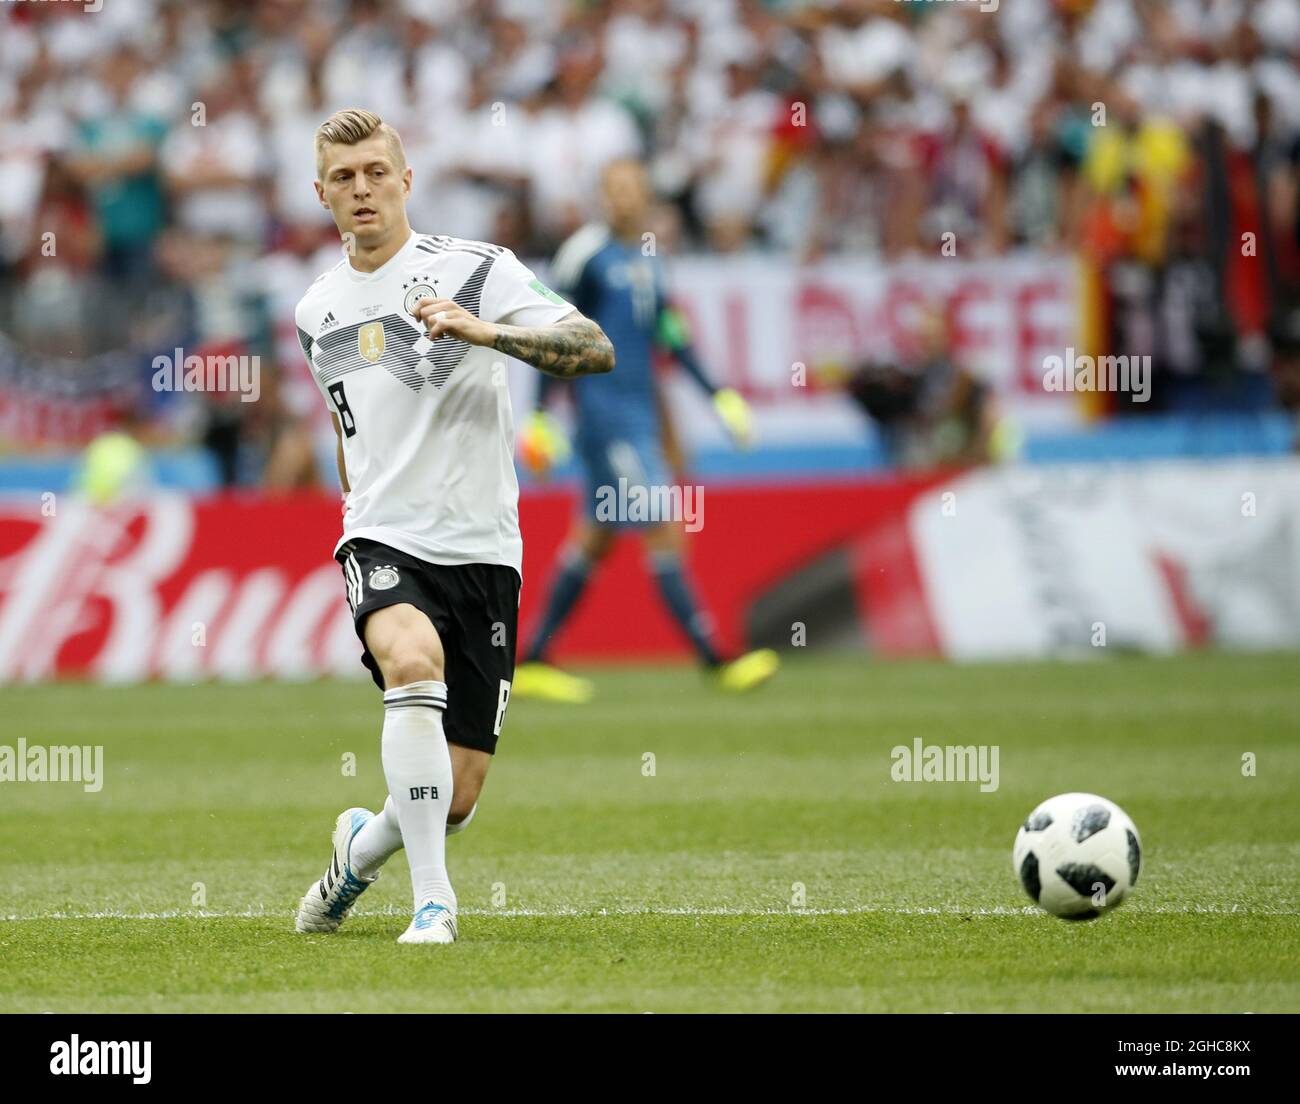 Germany's Toni Kroos in action during the FIFA World Cup 2018 Group F match at the Luzhniki Stadium, Moscow. Picture date 17th June 2018. Picture credit should read: David Klein/Sportimage via PA Images Stock Photo